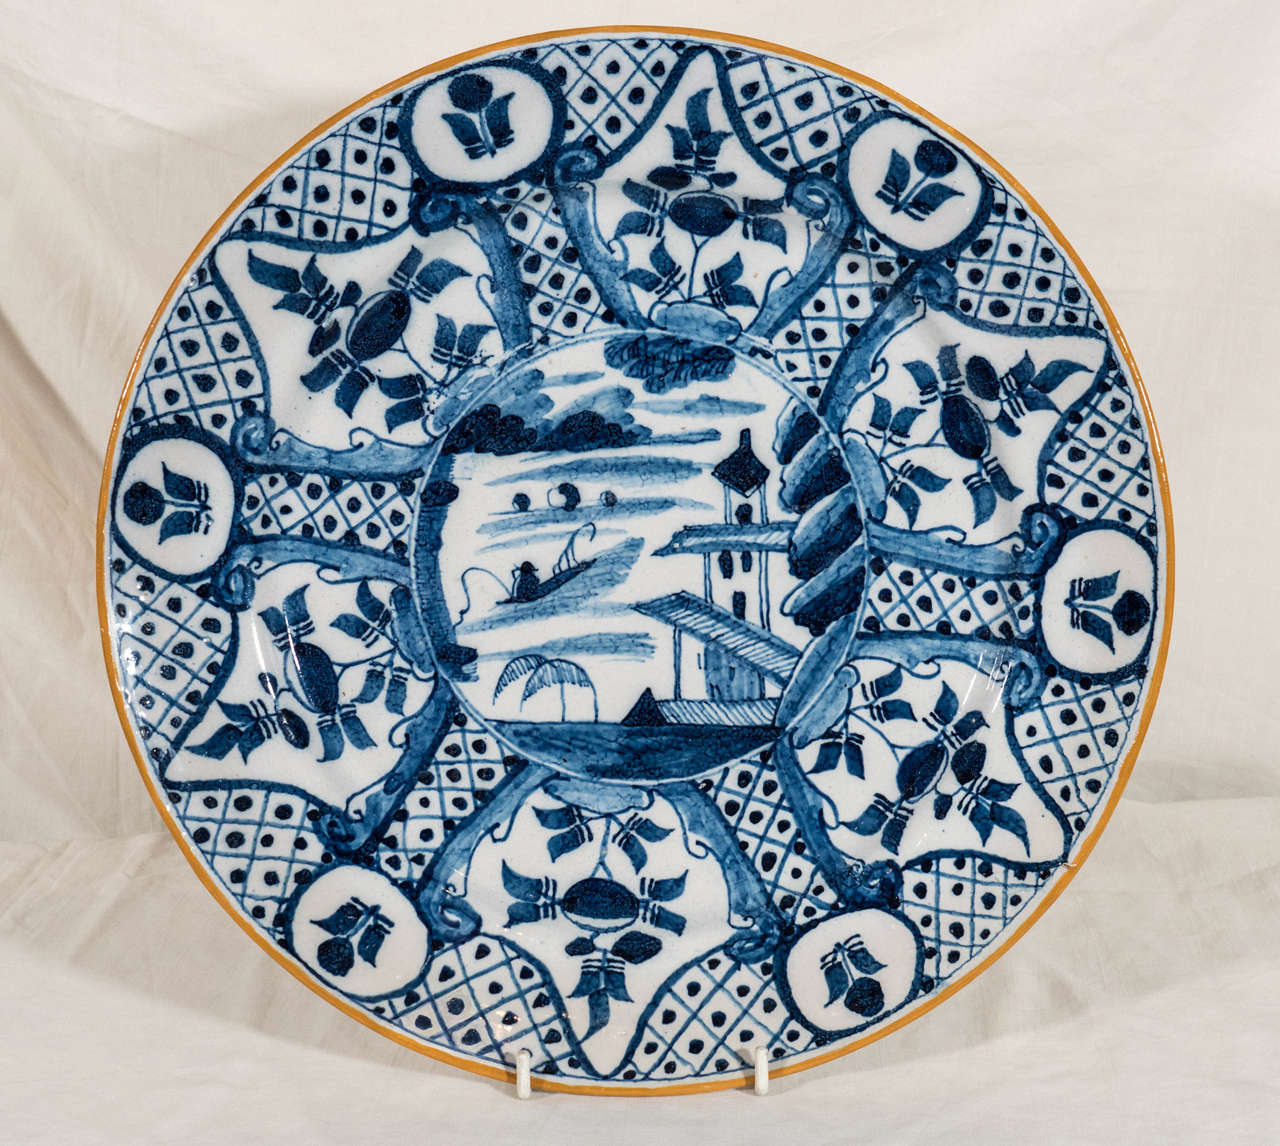 The design combines the bold brush strokes typical of Delft with the sophistication of Chinese inspired design. The central roundel shows a naive version of a chinoiserie scene with a pagoda, and small boats on the water. The dominant geometric